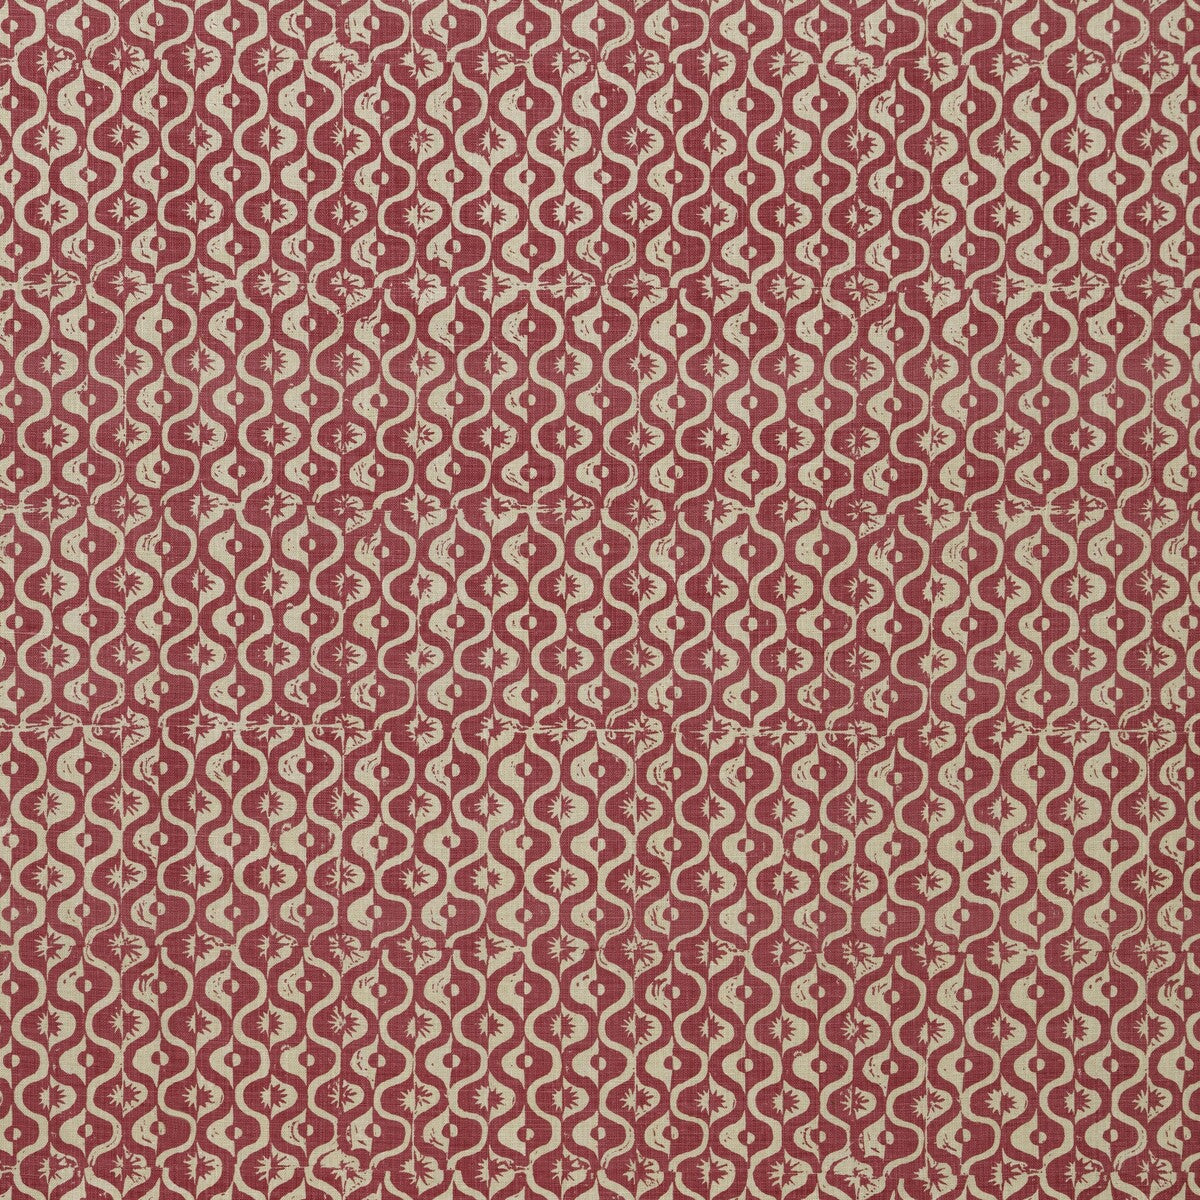 Small Medallion fabric in berry color - pattern BFC-3669.717.0 - by Lee Jofa in the Blithfield collection